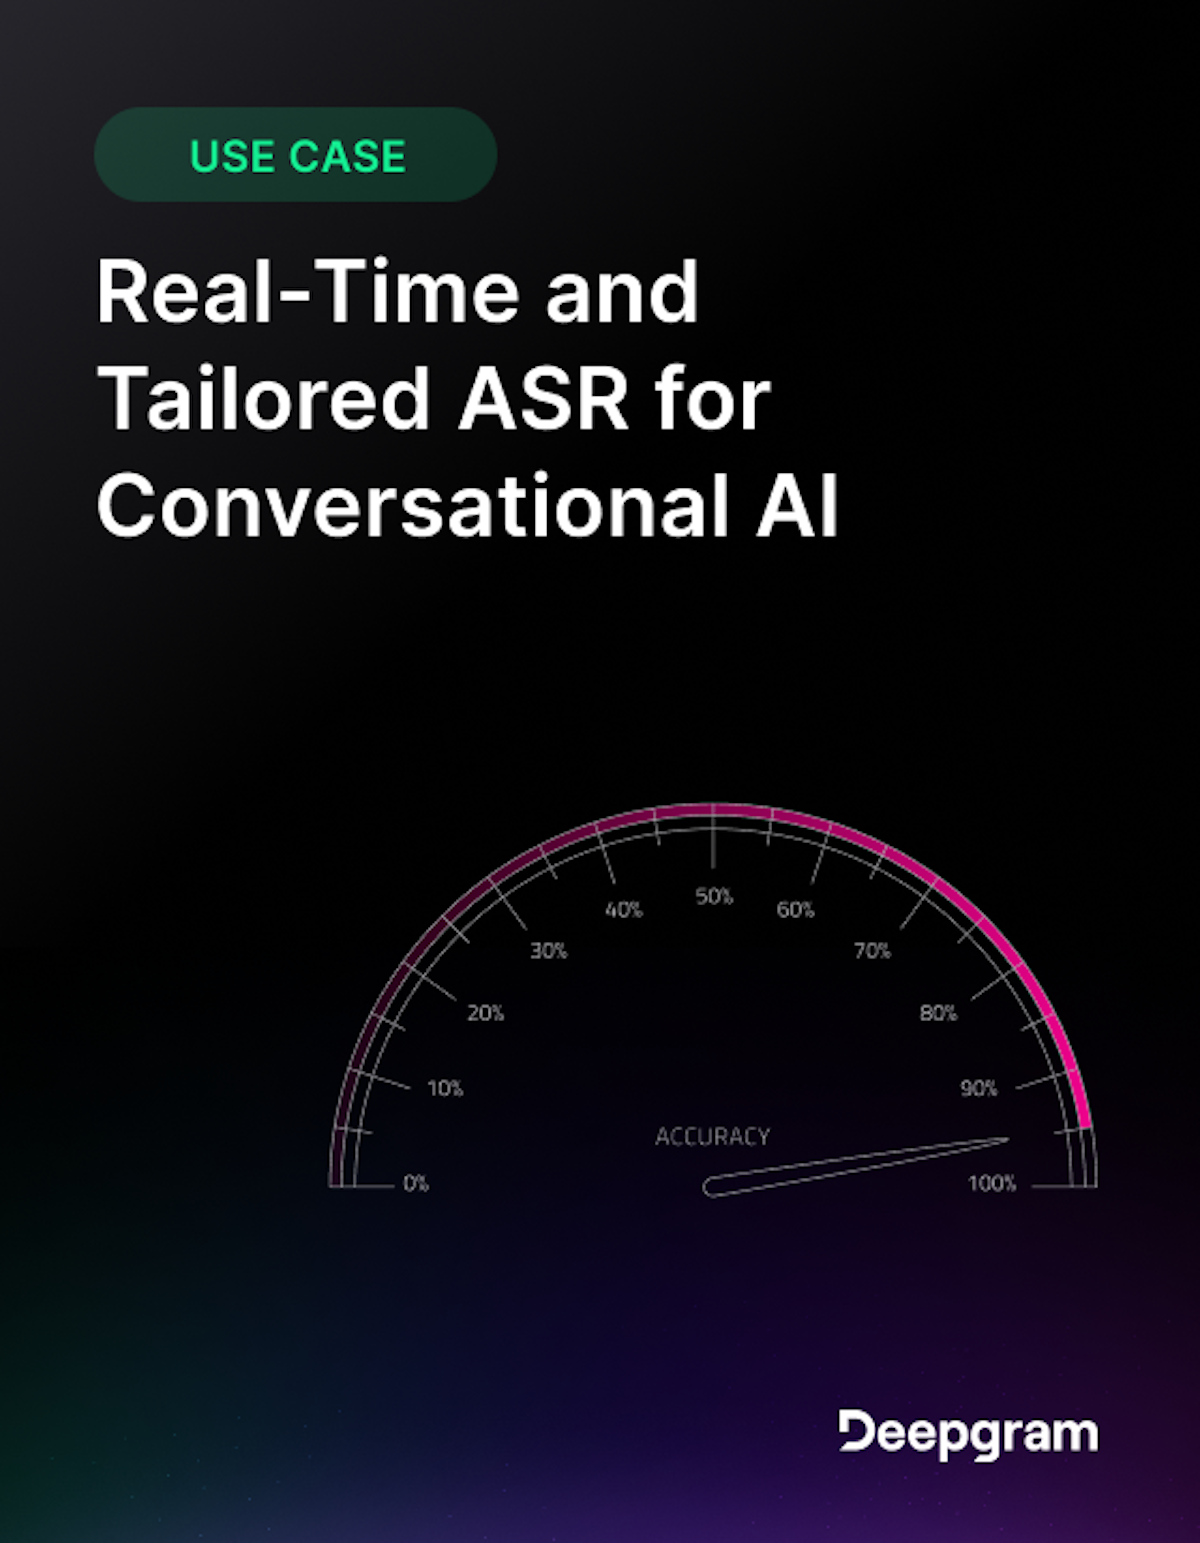 Real-Time and Tailored ASR for Conversational AI